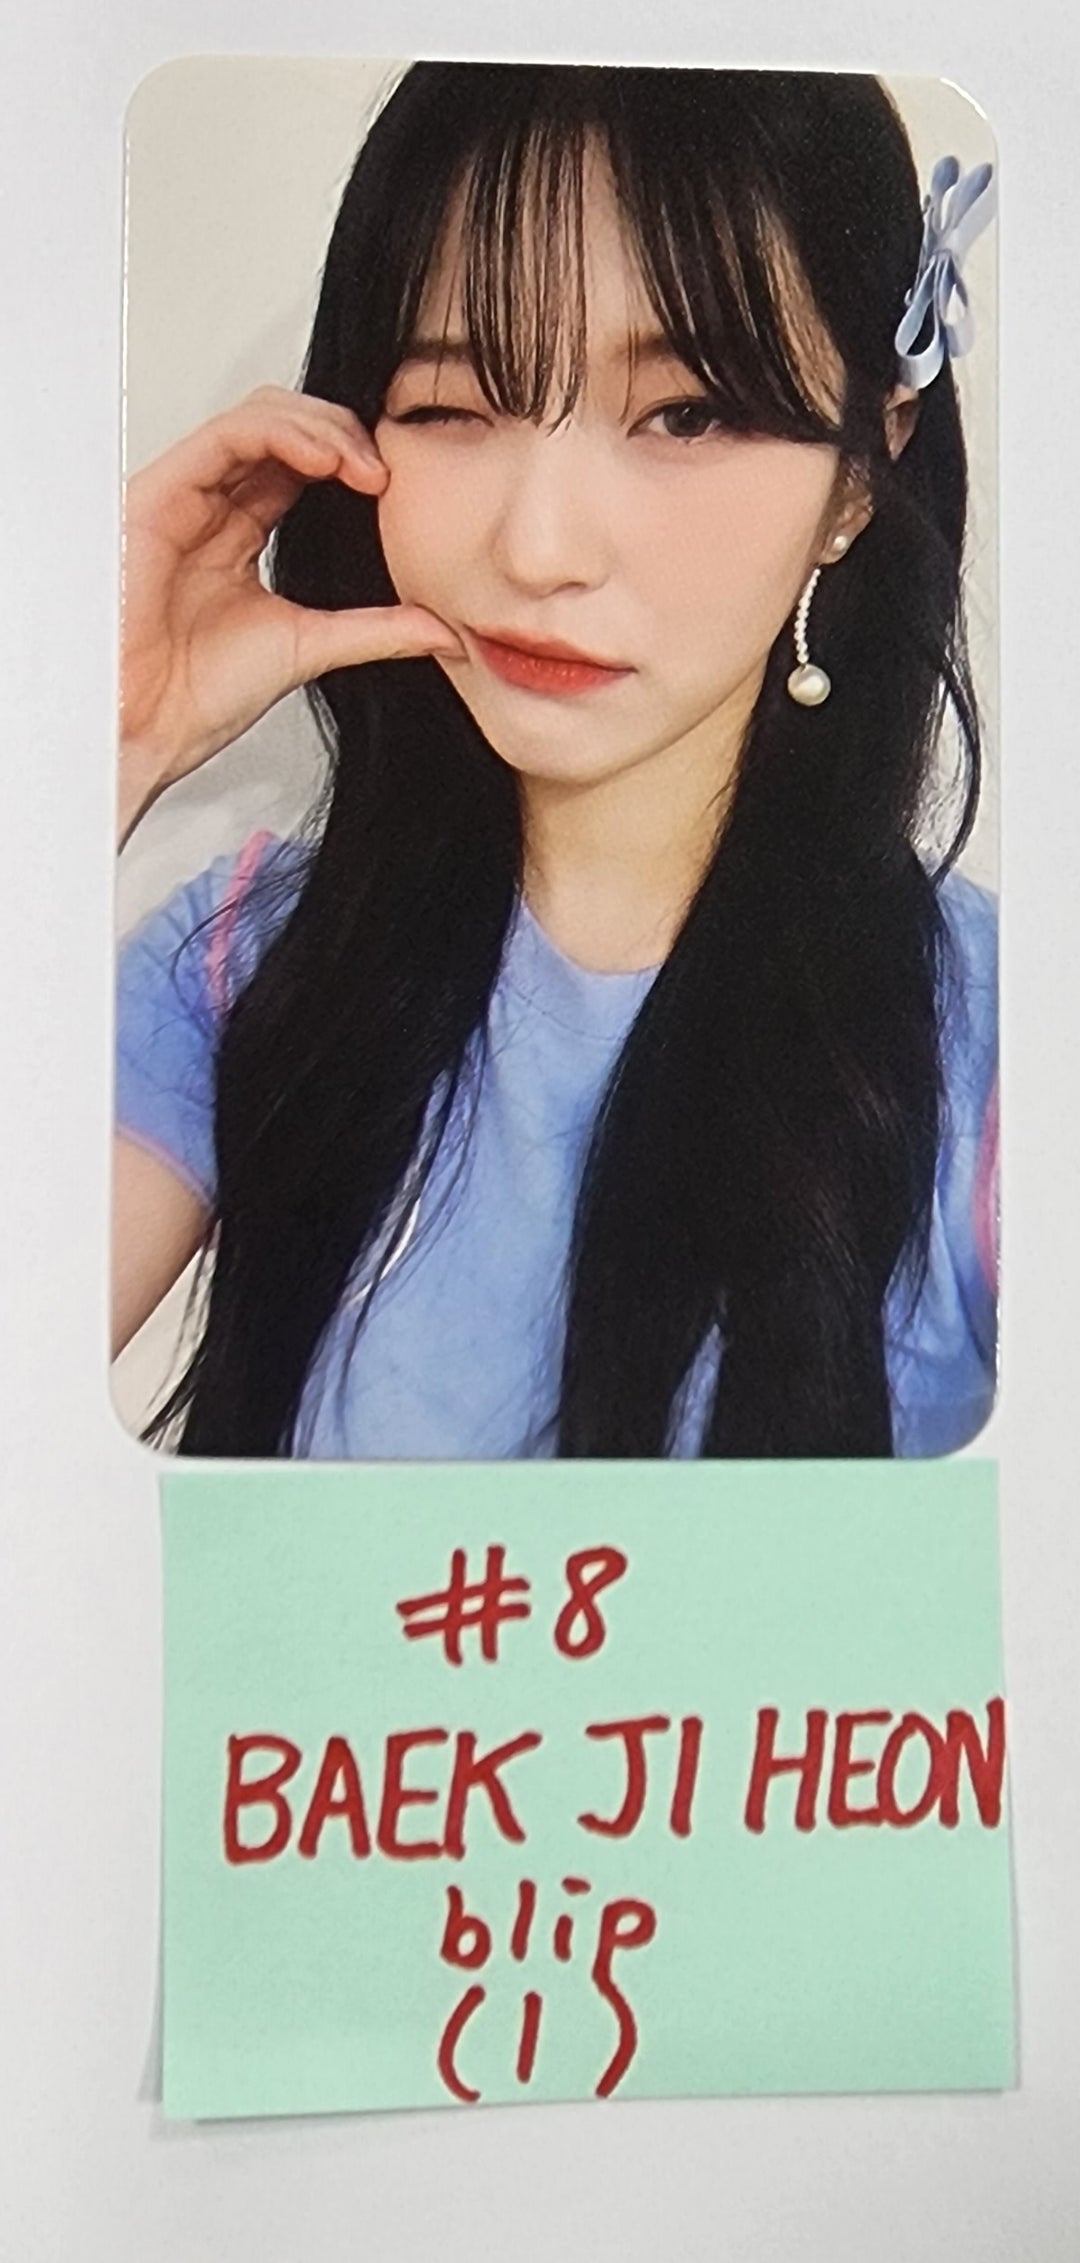 Fromis_9 "Unlock My World" - Blip Fansign Event Photocard